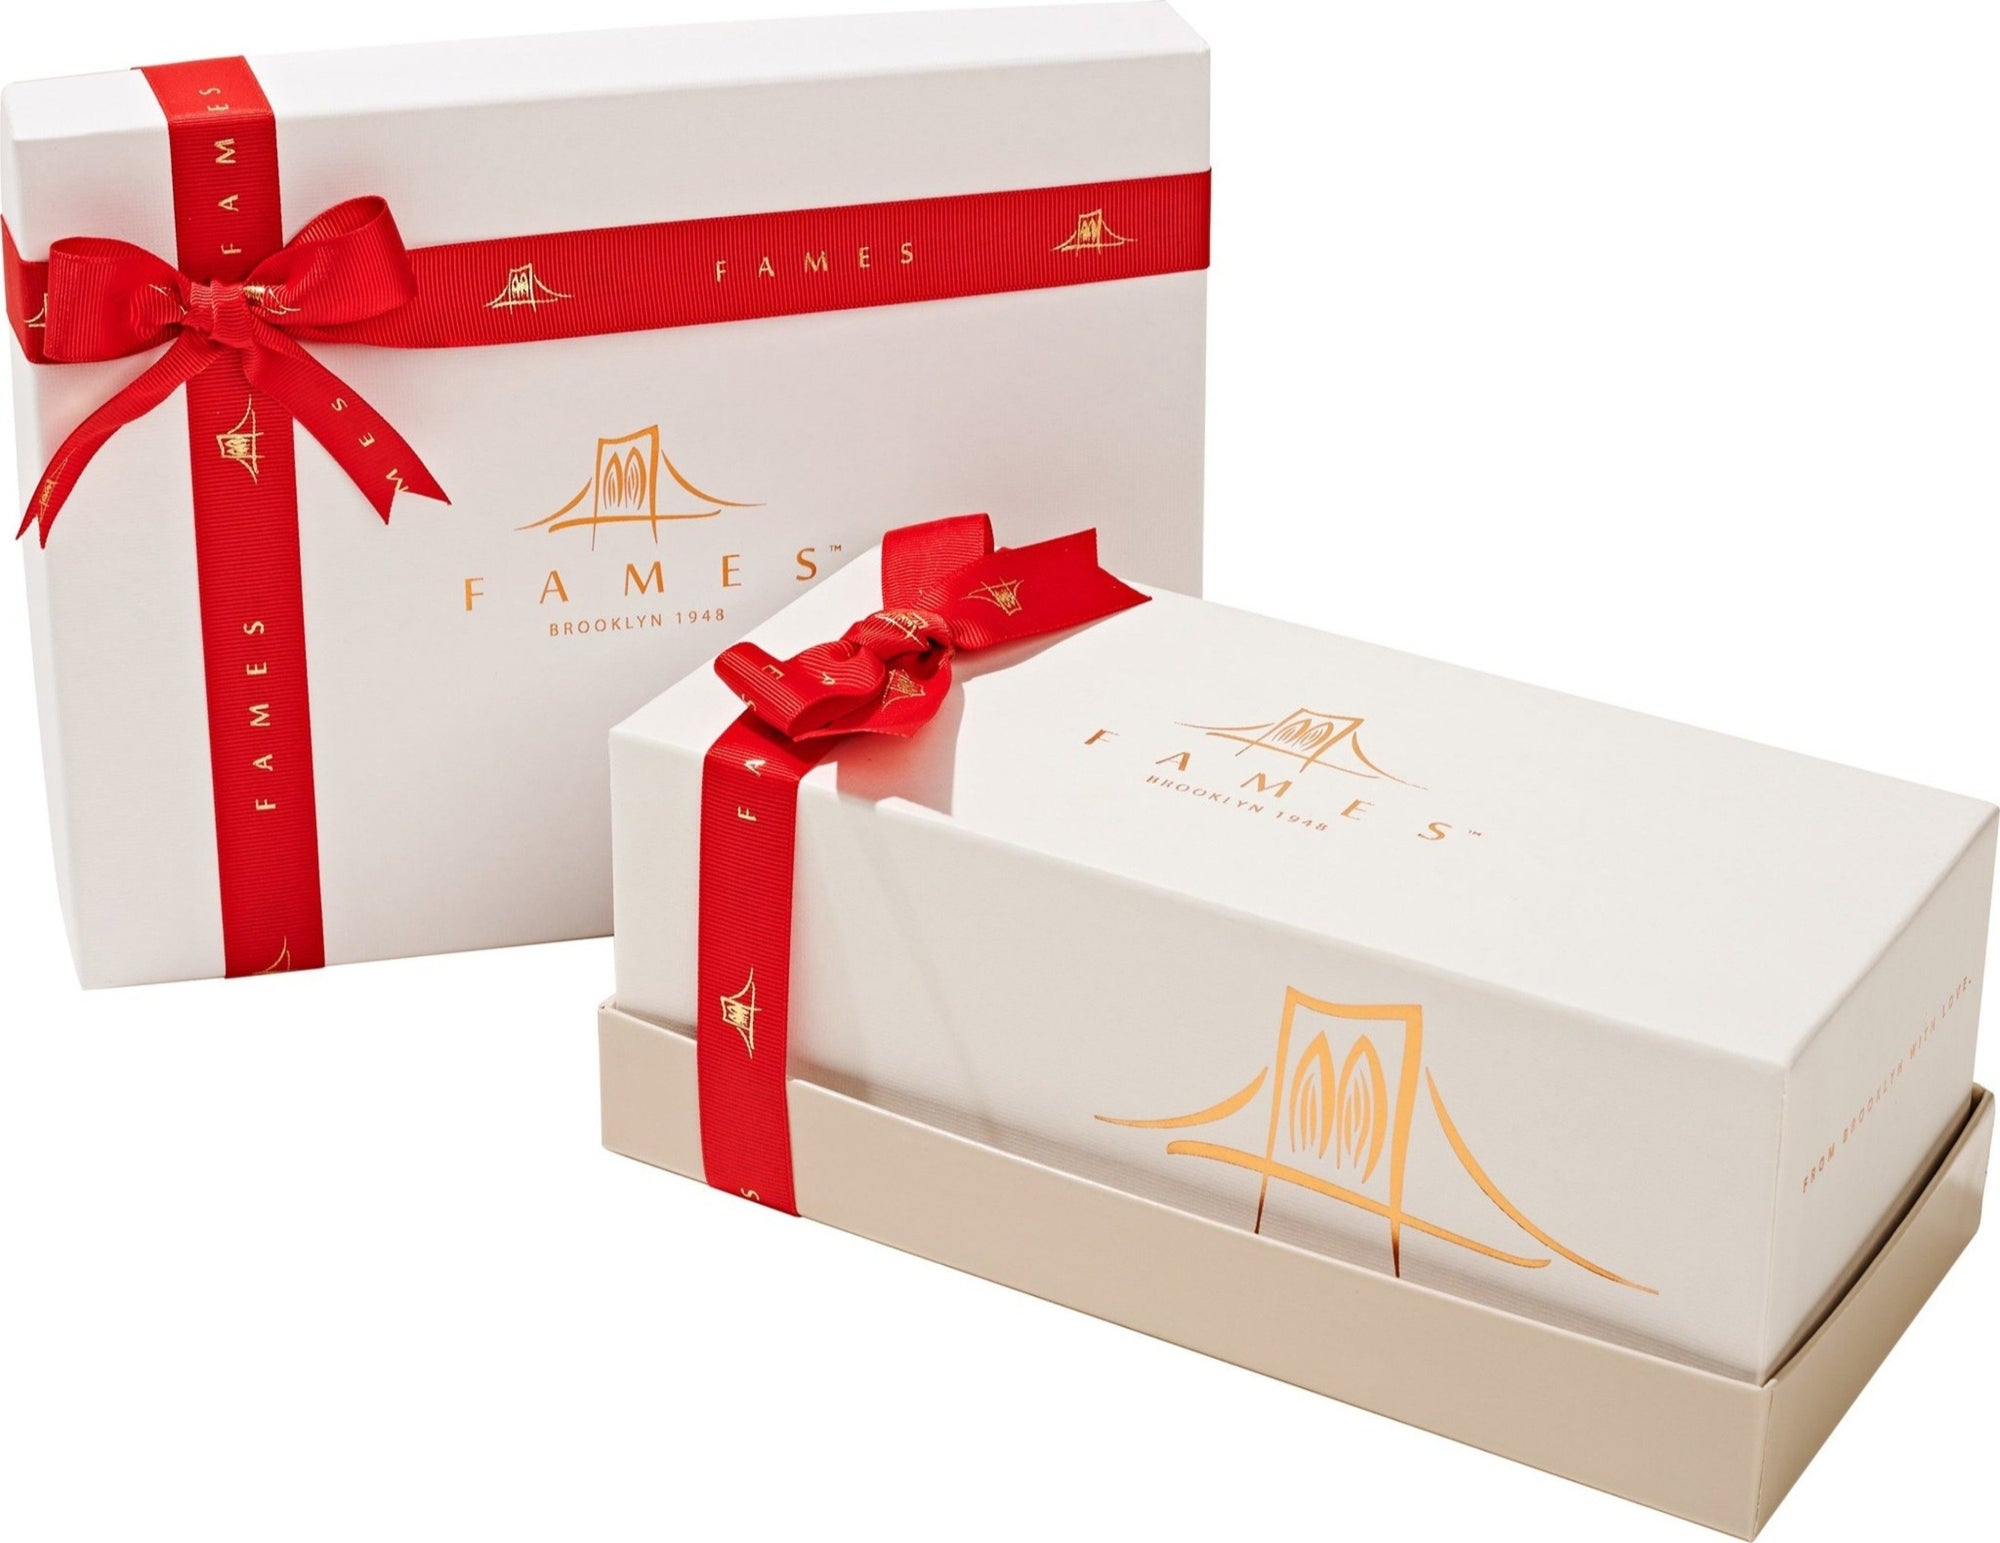 Holiday Chocolate Gift Set, Fancy chocolate Gift Box With Chocolate Log, Unique Holiday Gift Idea For Him or Her, Corporate Gifts, Men Women, Families, Thanksgiving, Kosher, Dairy Free.  Fames Chocolate   